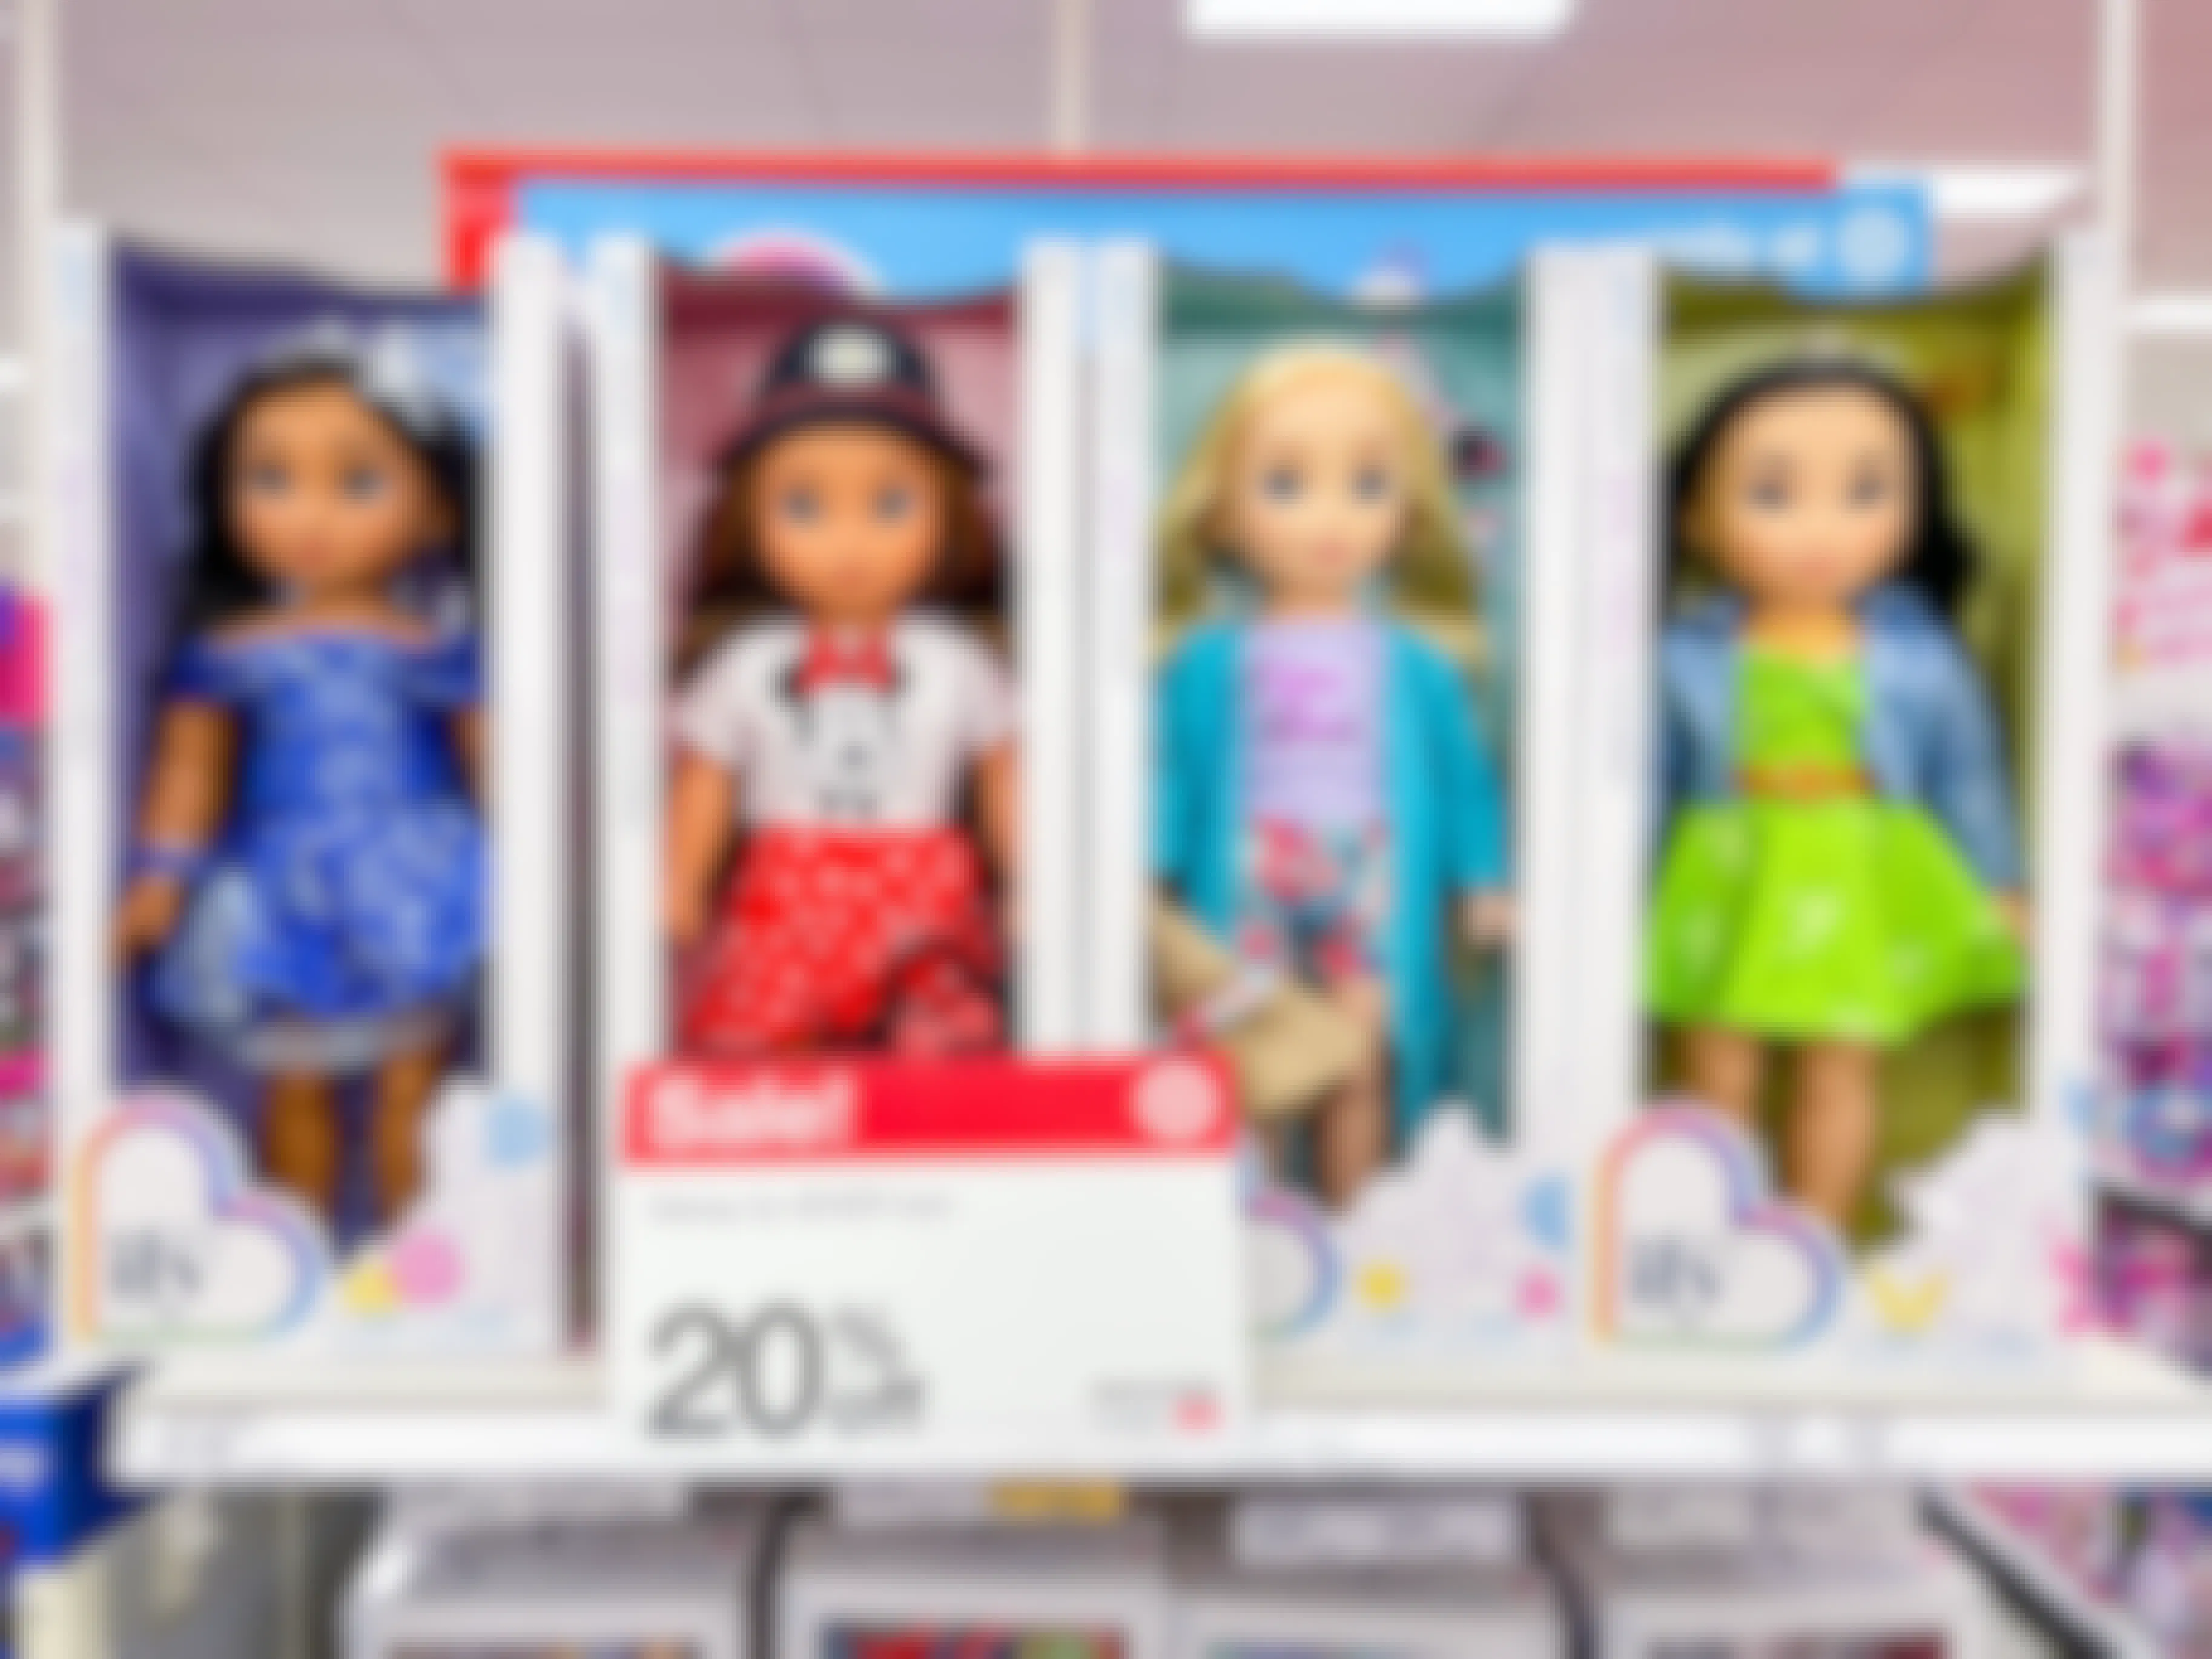 Disney i love you 4 ever dolls on the shelf at Target with a 20% off sale sign